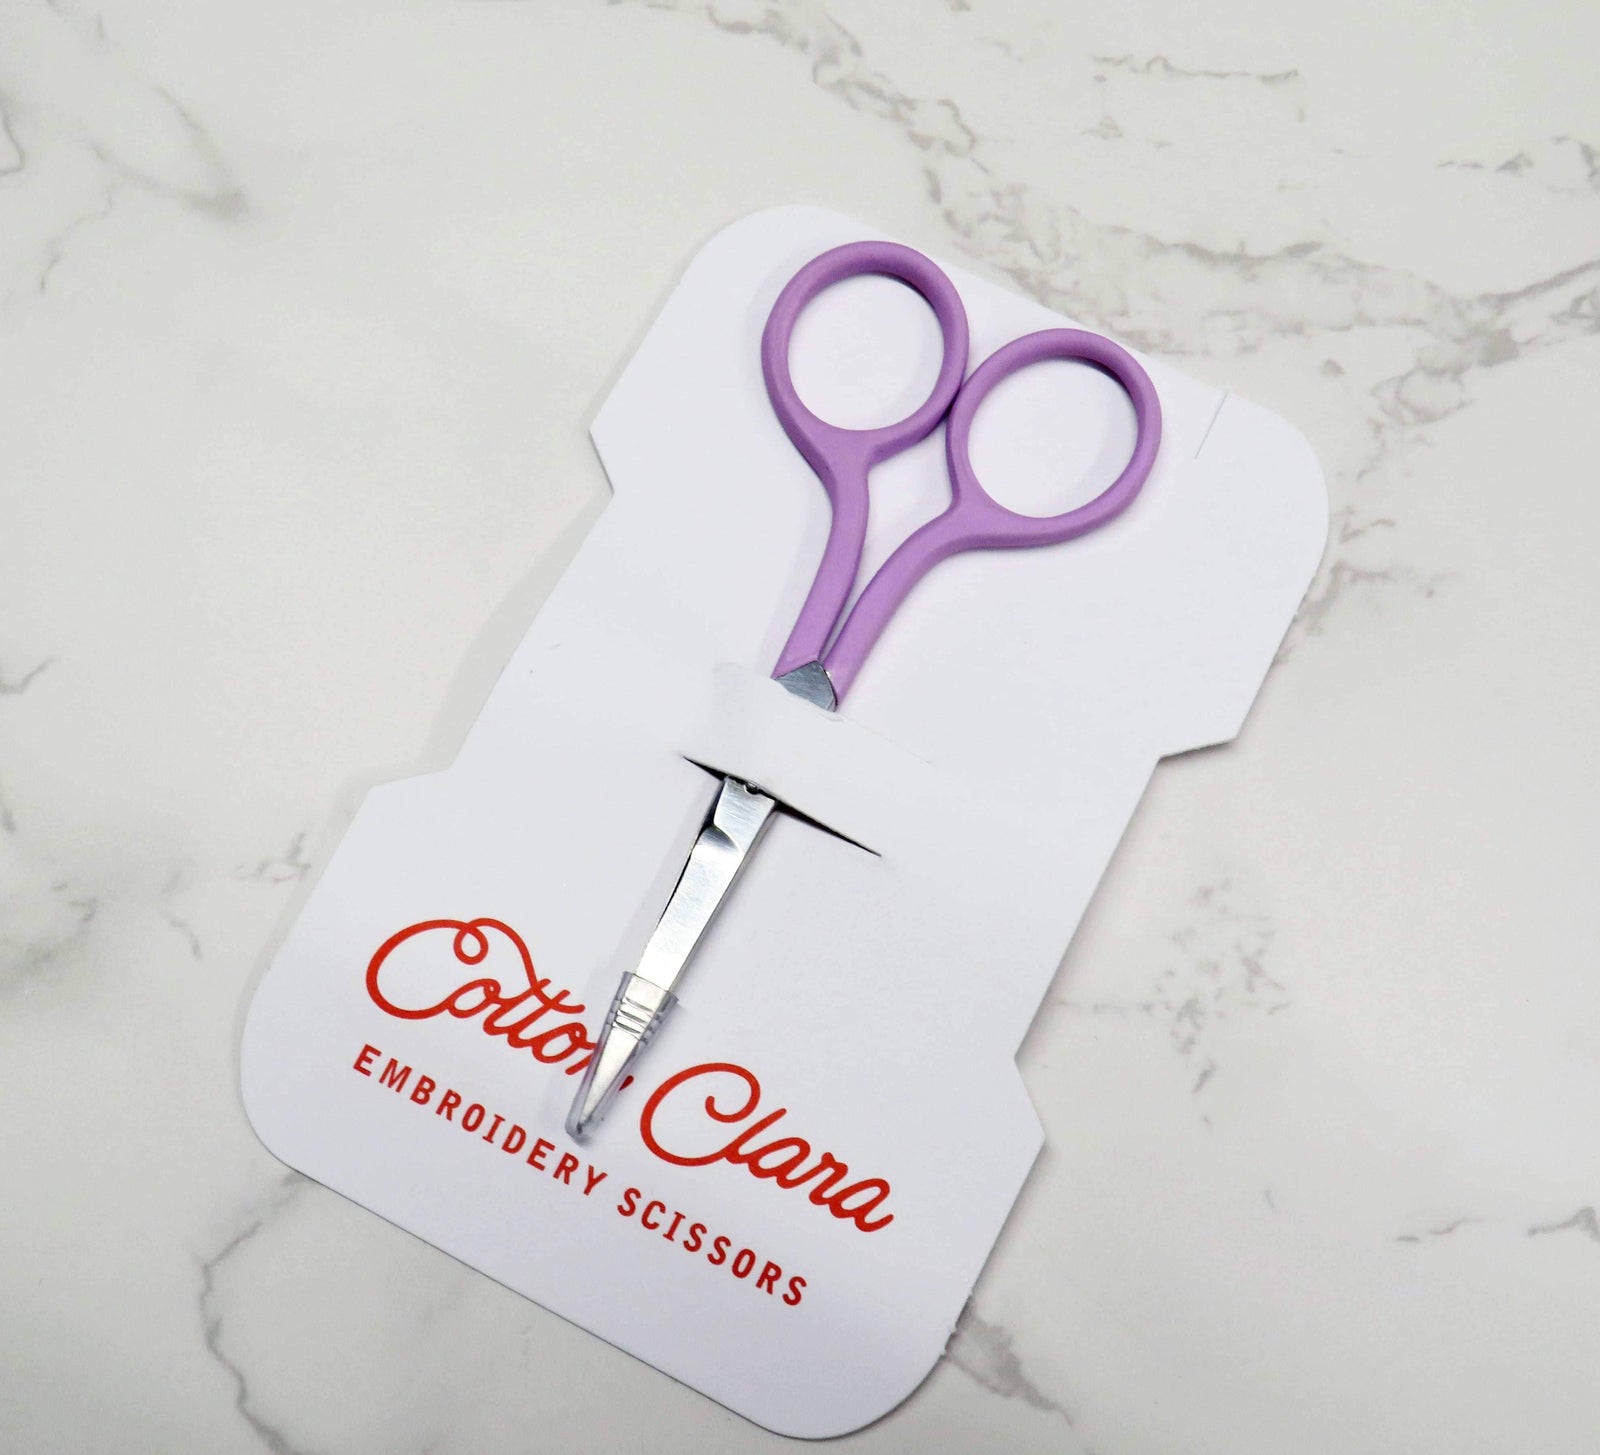 Cotton Clara Embroidery Scissors, Sharp Points perfect for embroidery , Embroidery Supplies , StitchDoodles , embroidery hoop kit, embroidery kit for adults, embroidery kit for beginers, hand embroidery scissors , StitchDoodles , shop.stitchdoodles.com